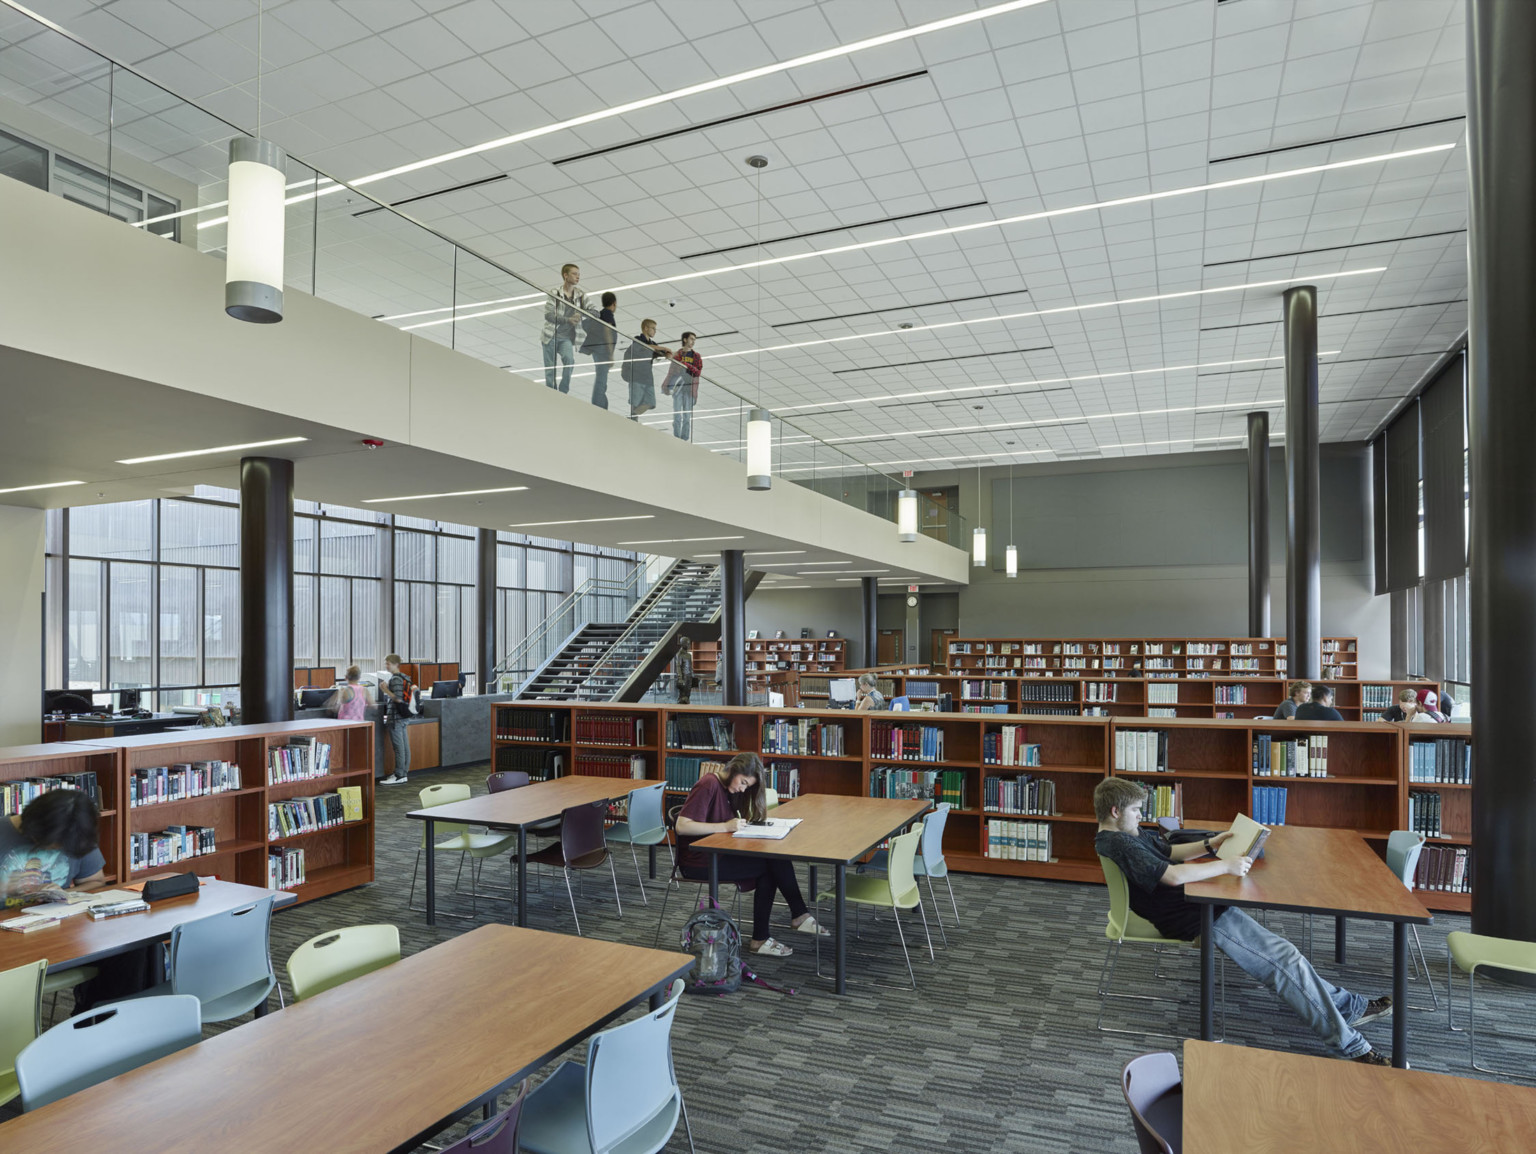 Study area of library surrounded by half height bookshelves. Black columns in double height room with 2nd floor walkway left